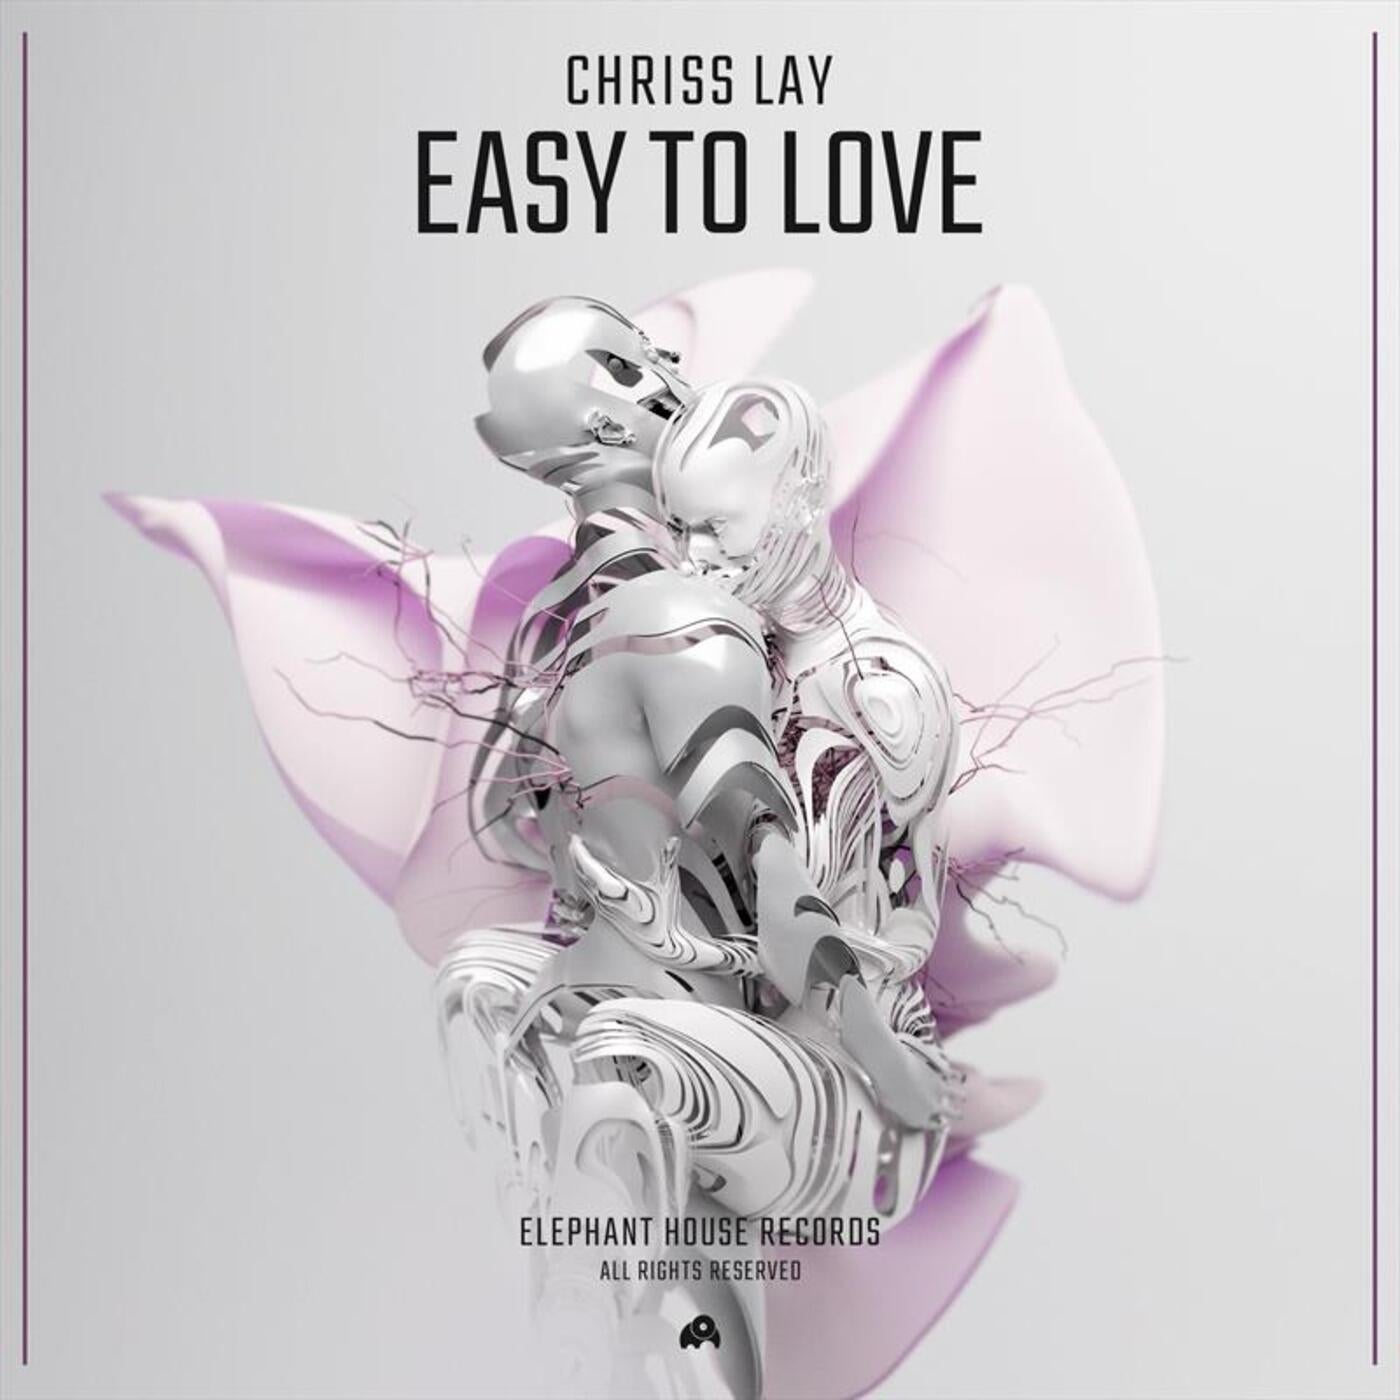 Easy to Love (Extended Mix)